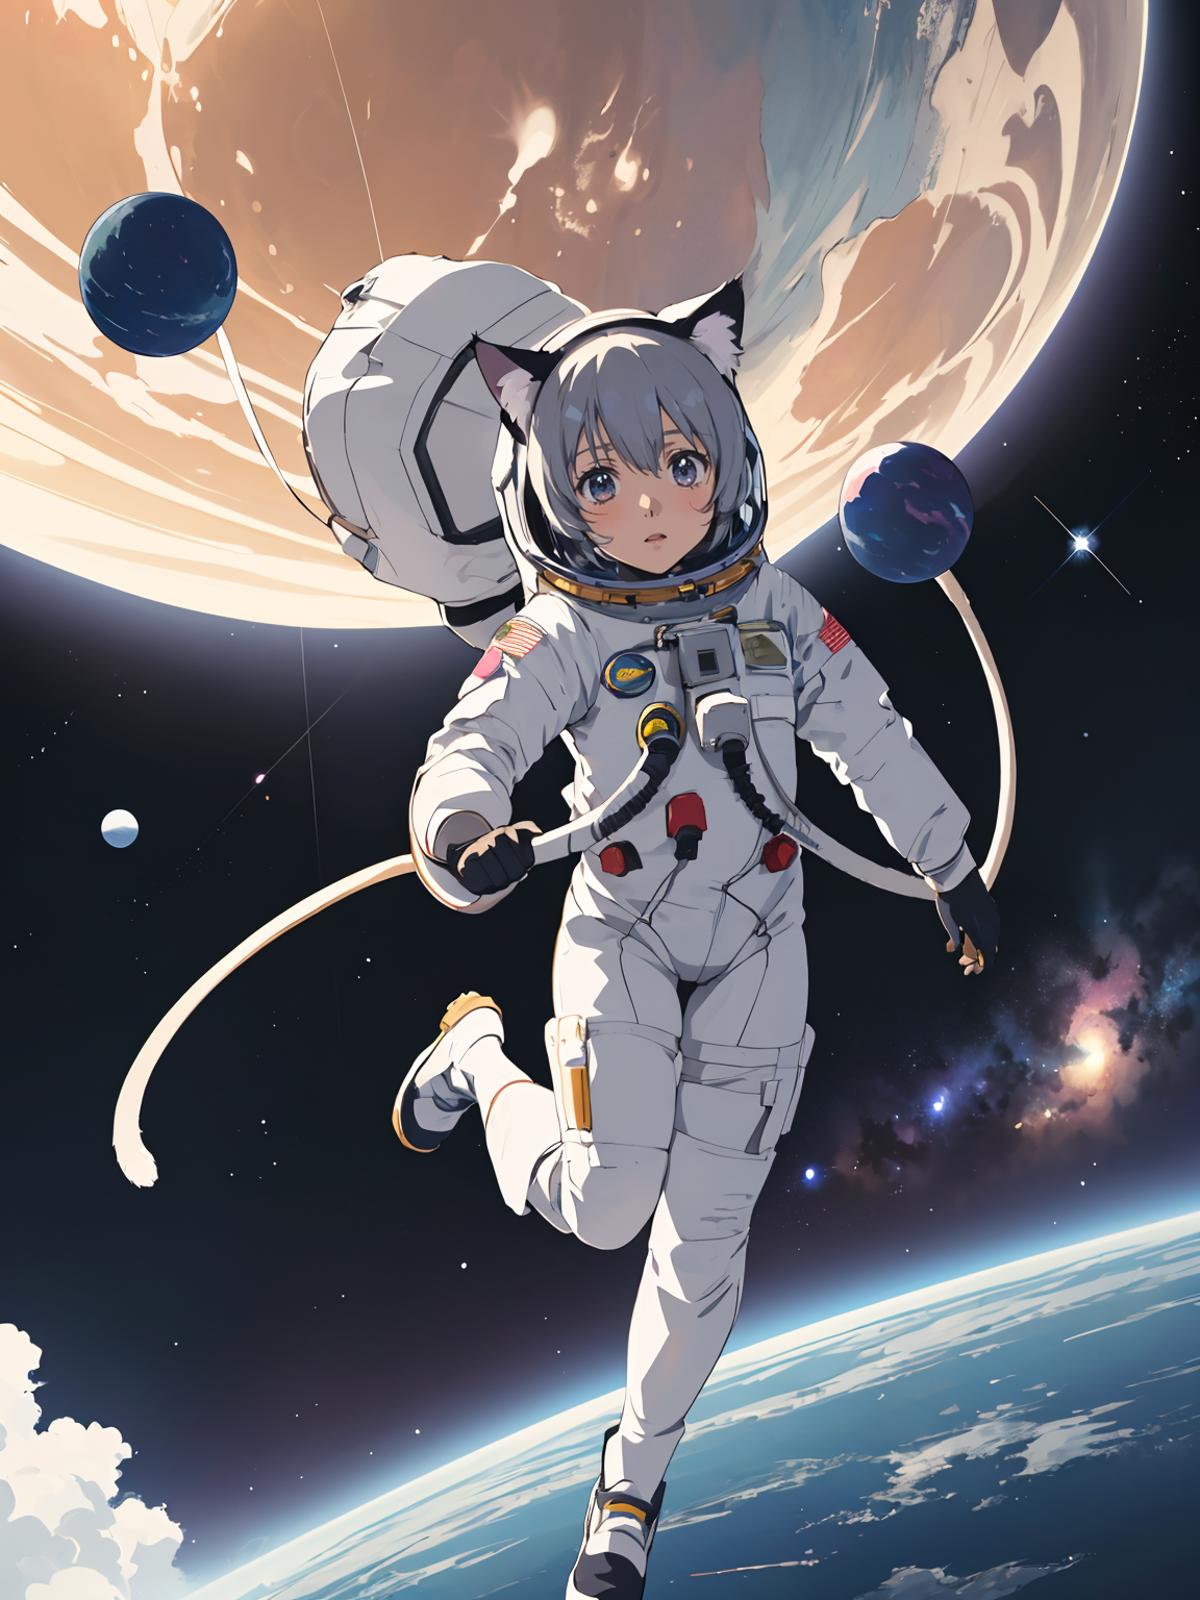 A young girl dressed in a space suit with a cat face and a backpack.